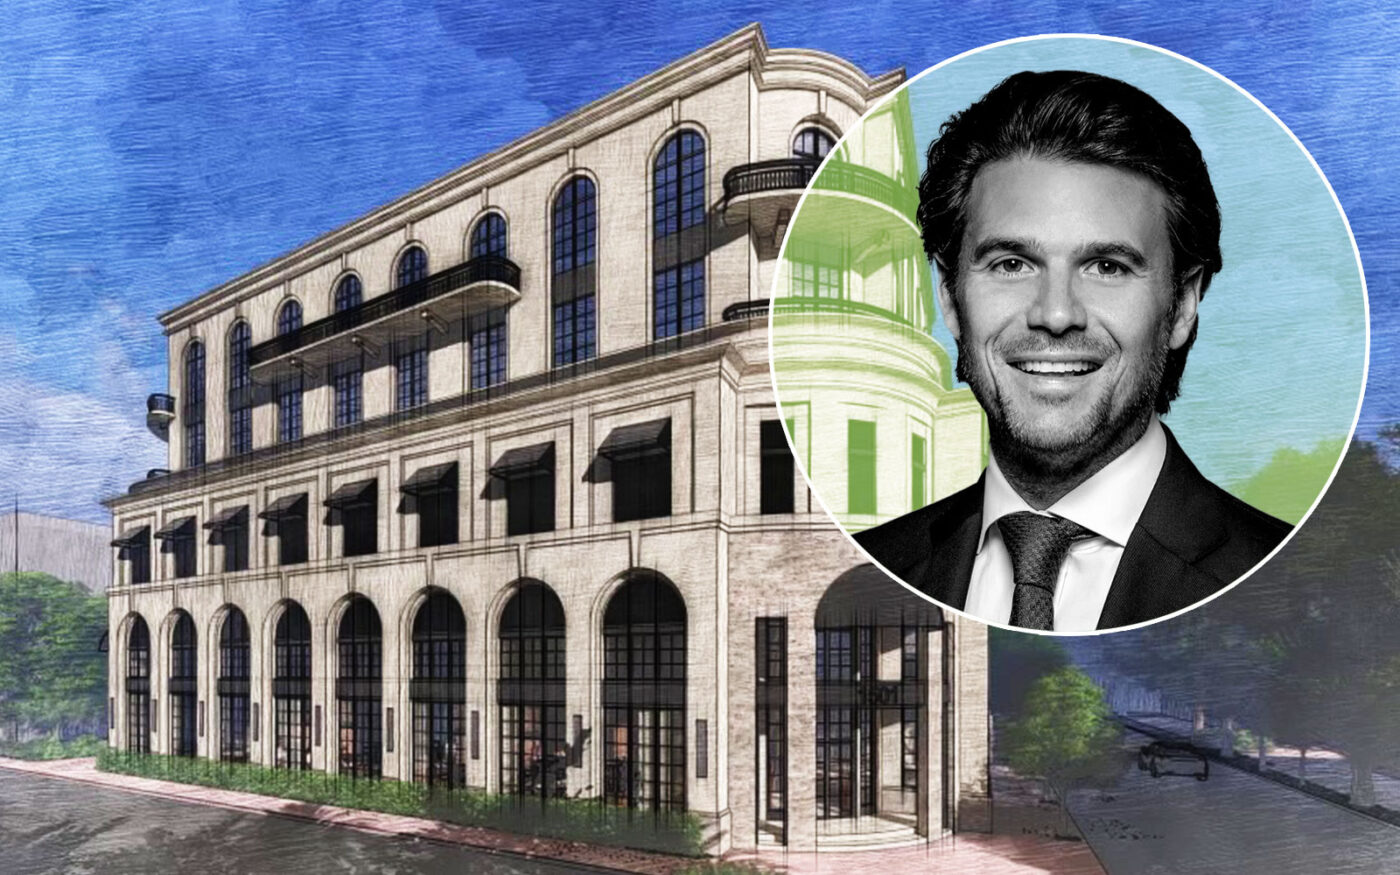 One Sotheby’s Daniel de la Vega and renderings of the Proposed headquarters in Coral Gables